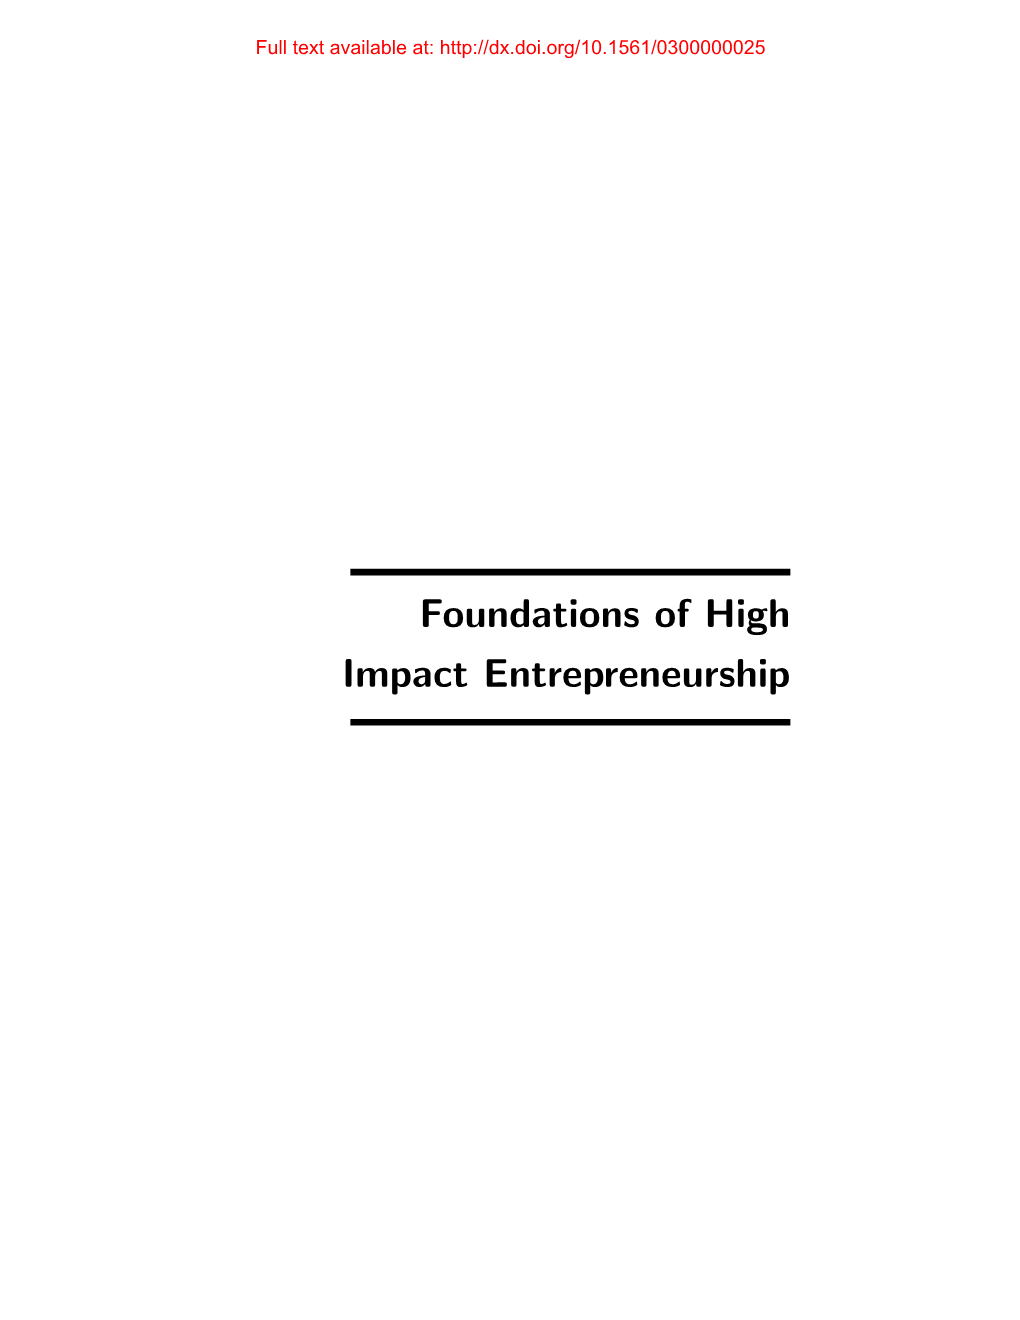 Foundations of High Impact Entrepreneurship Full Text Available At